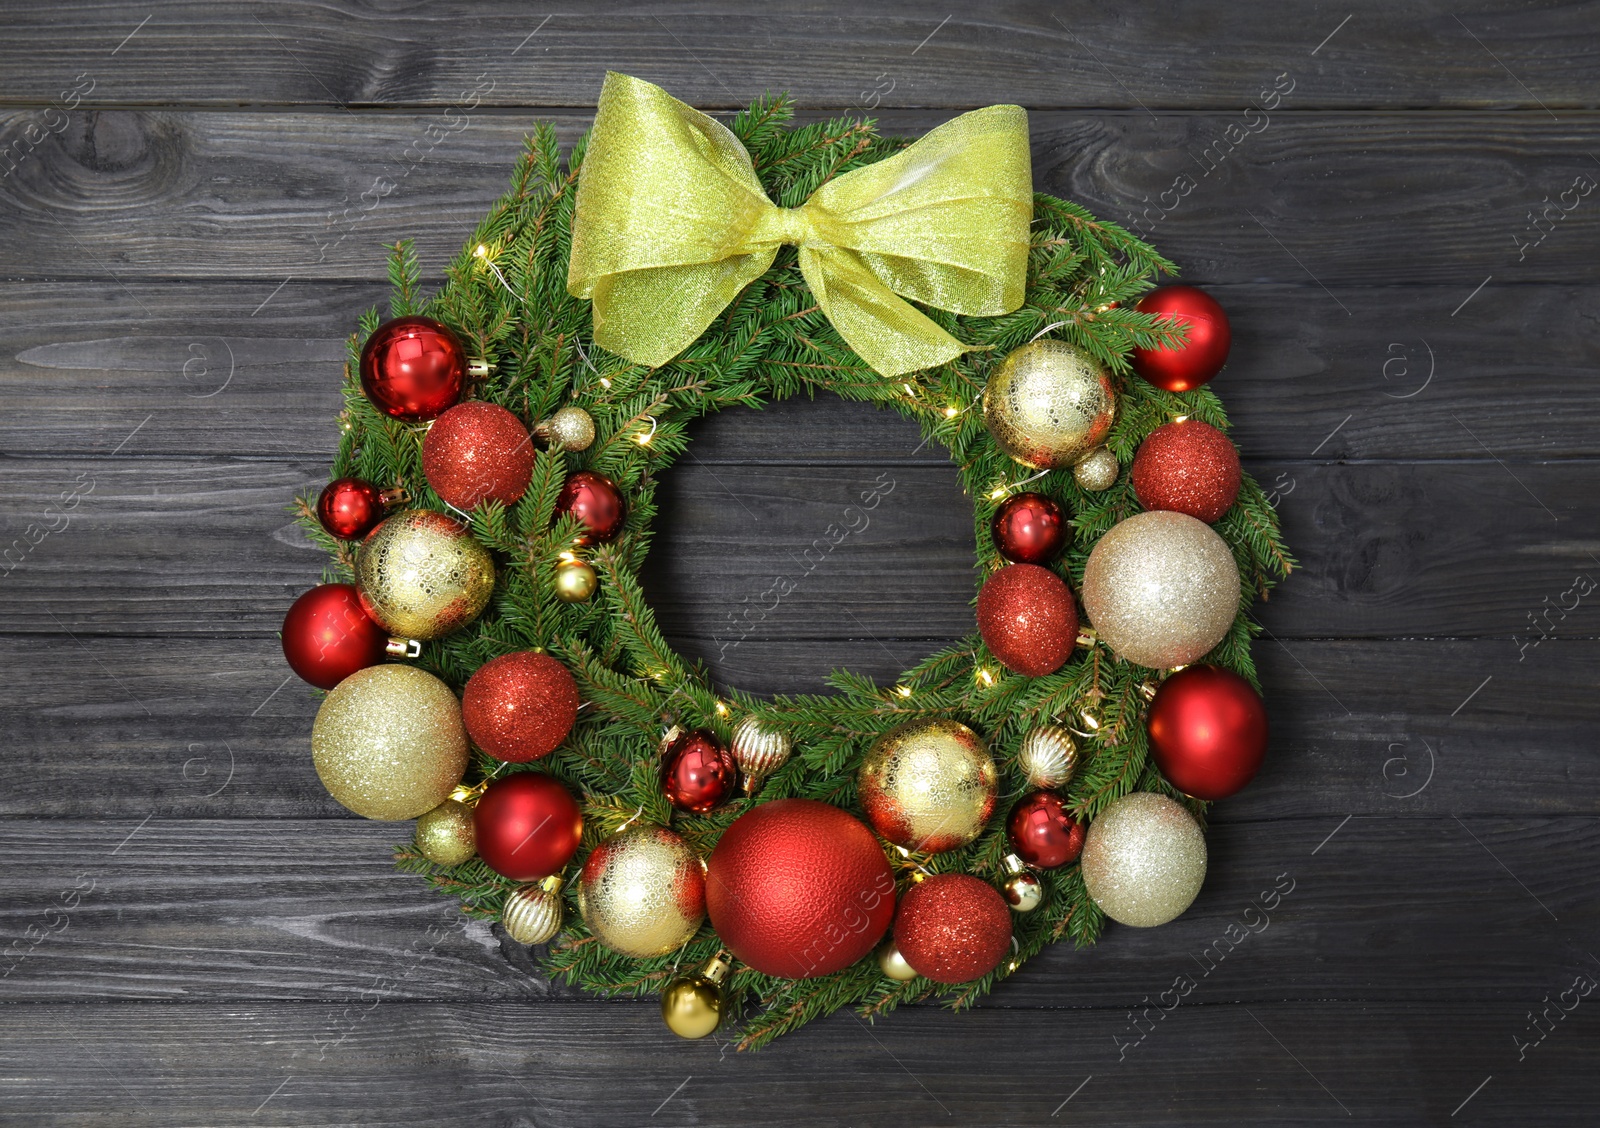 Photo of Beautiful Christmas wreath with festive decor on black wooden background